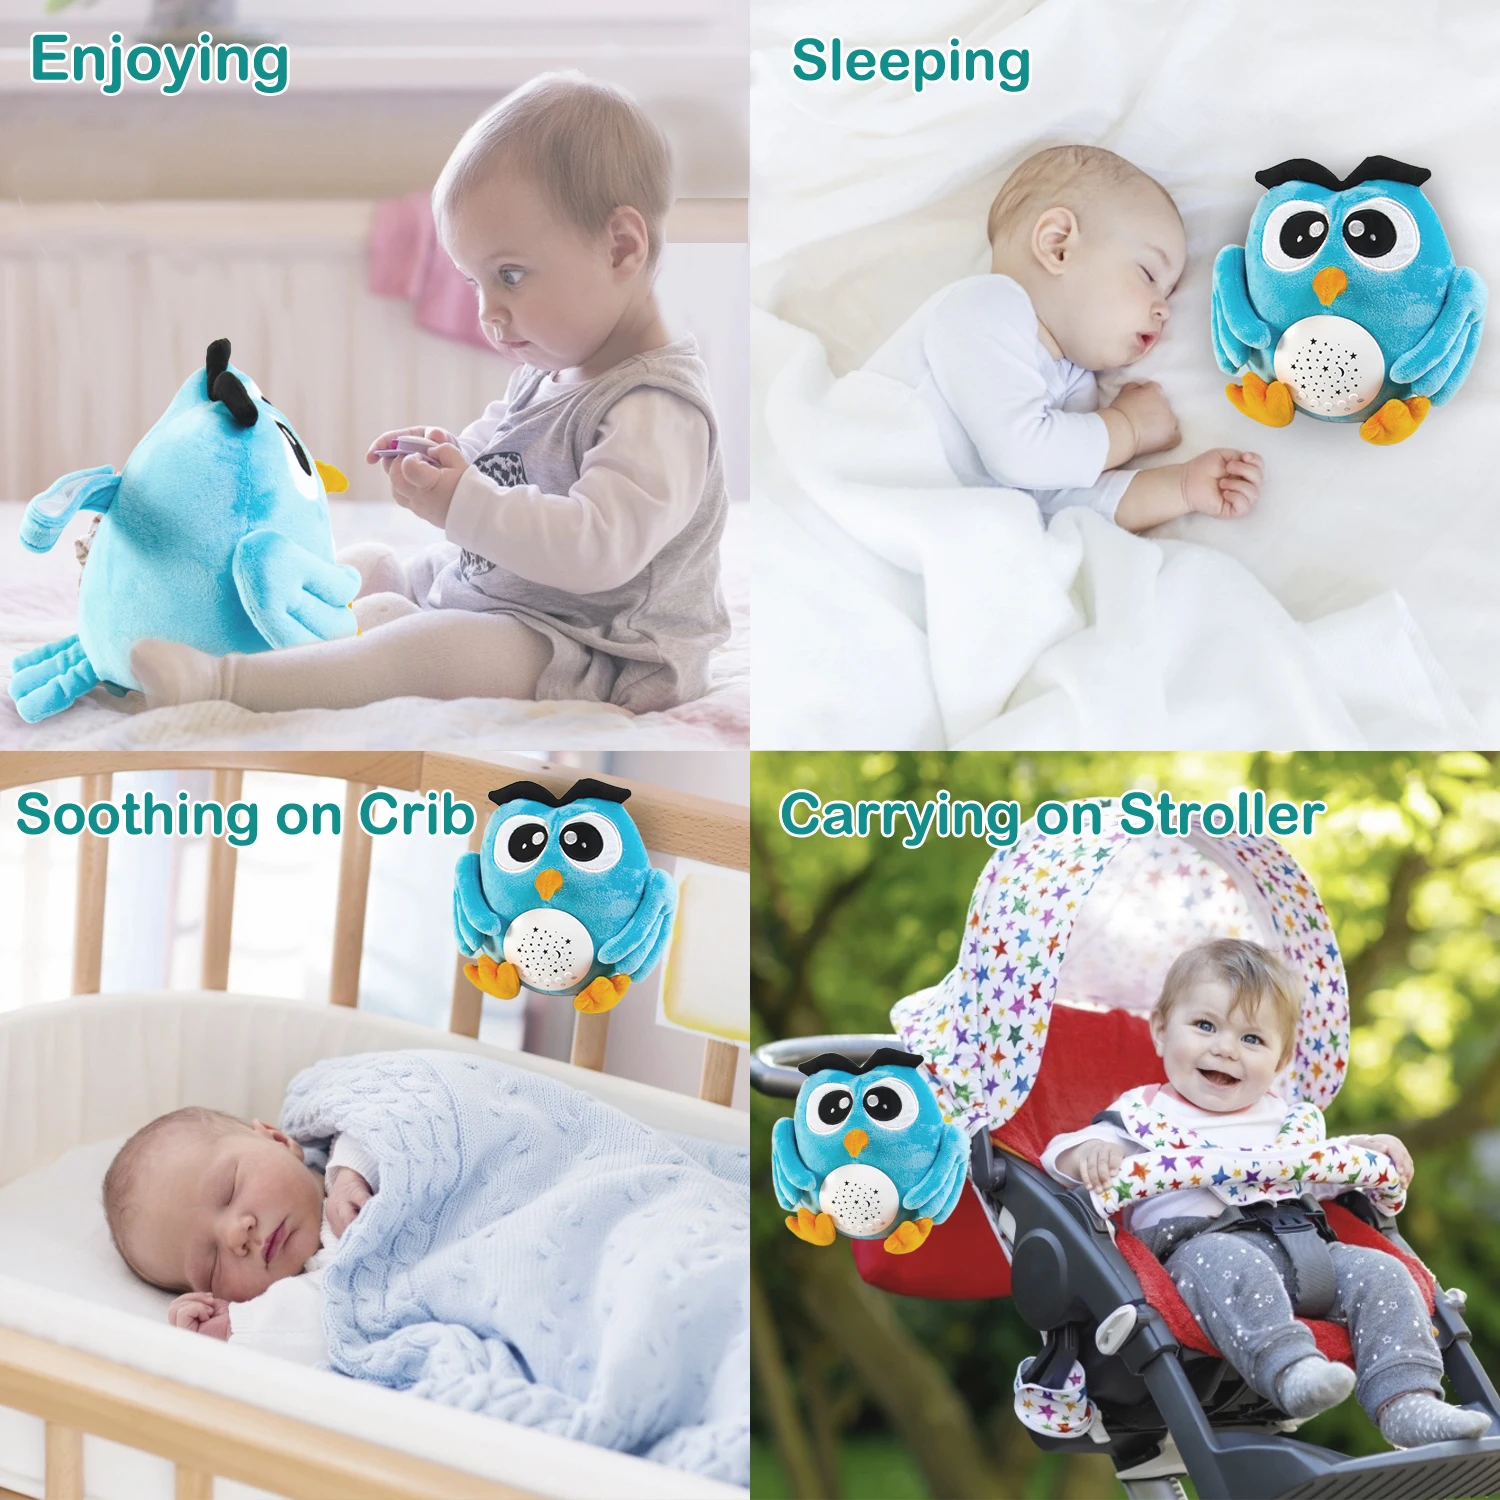 Baby soothing sound machine white noise sound therapy baby sleep machine